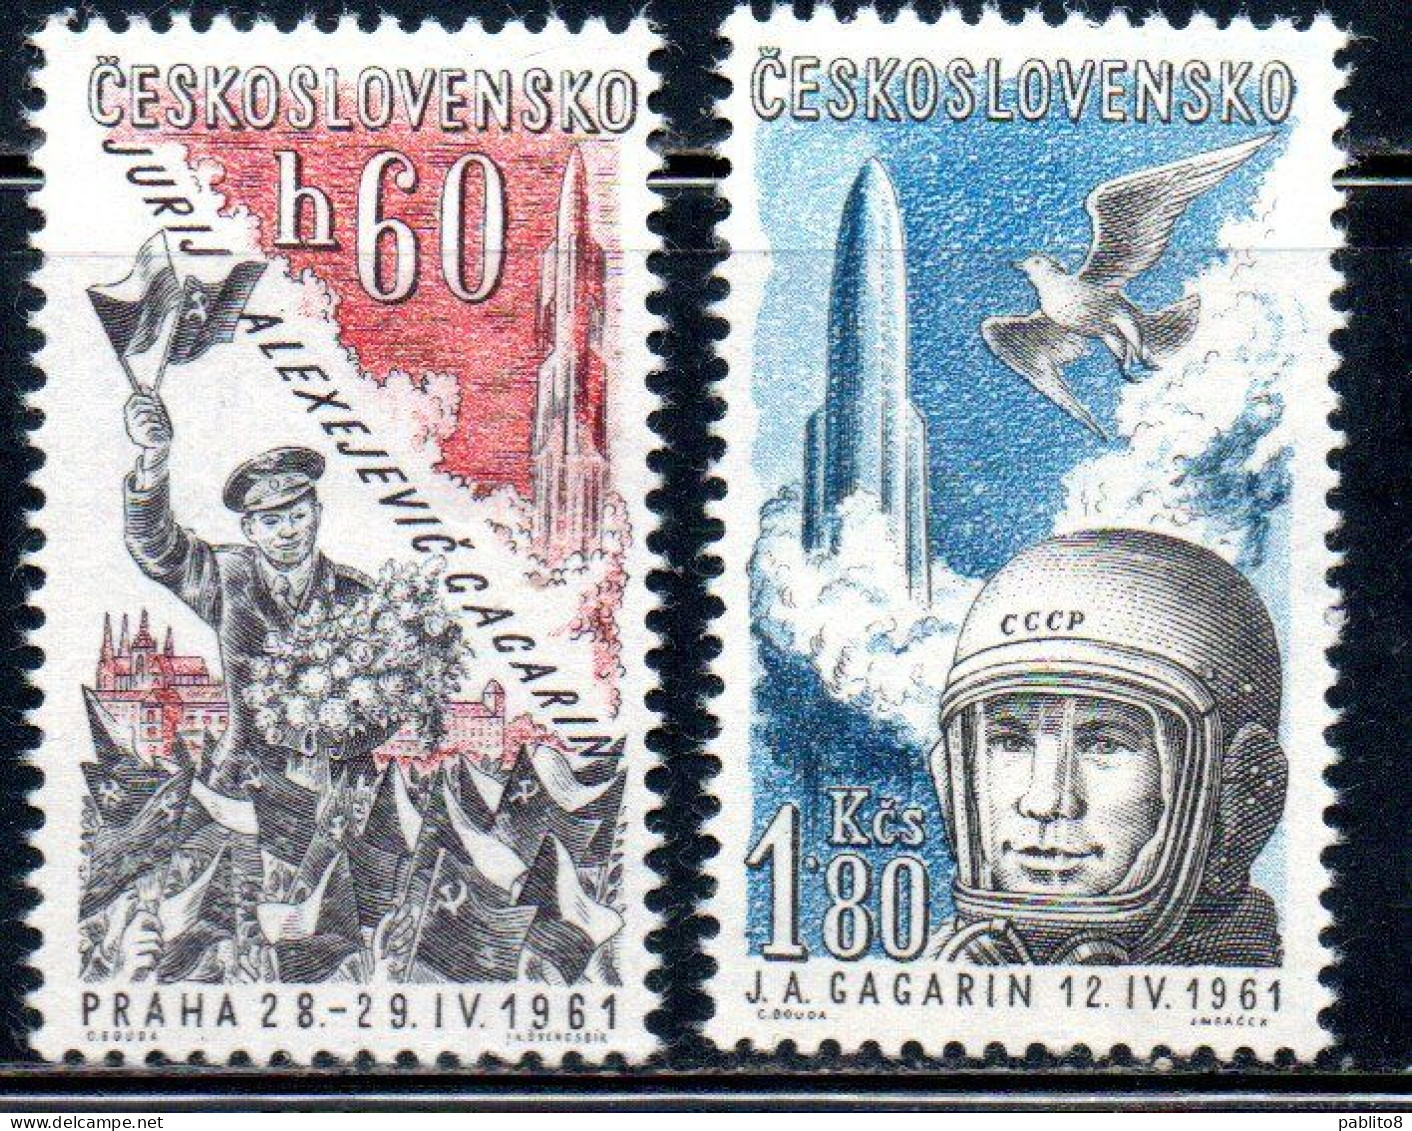 CZECHOSLOVAKIA CECOSLOVACCHIA 1961 AIR POST MAIL AIRMAIL COMMEMORATES MAY GAGARIN' VISIT COMPLETE SET SERIE COMPLETA MNH - Posta Aerea